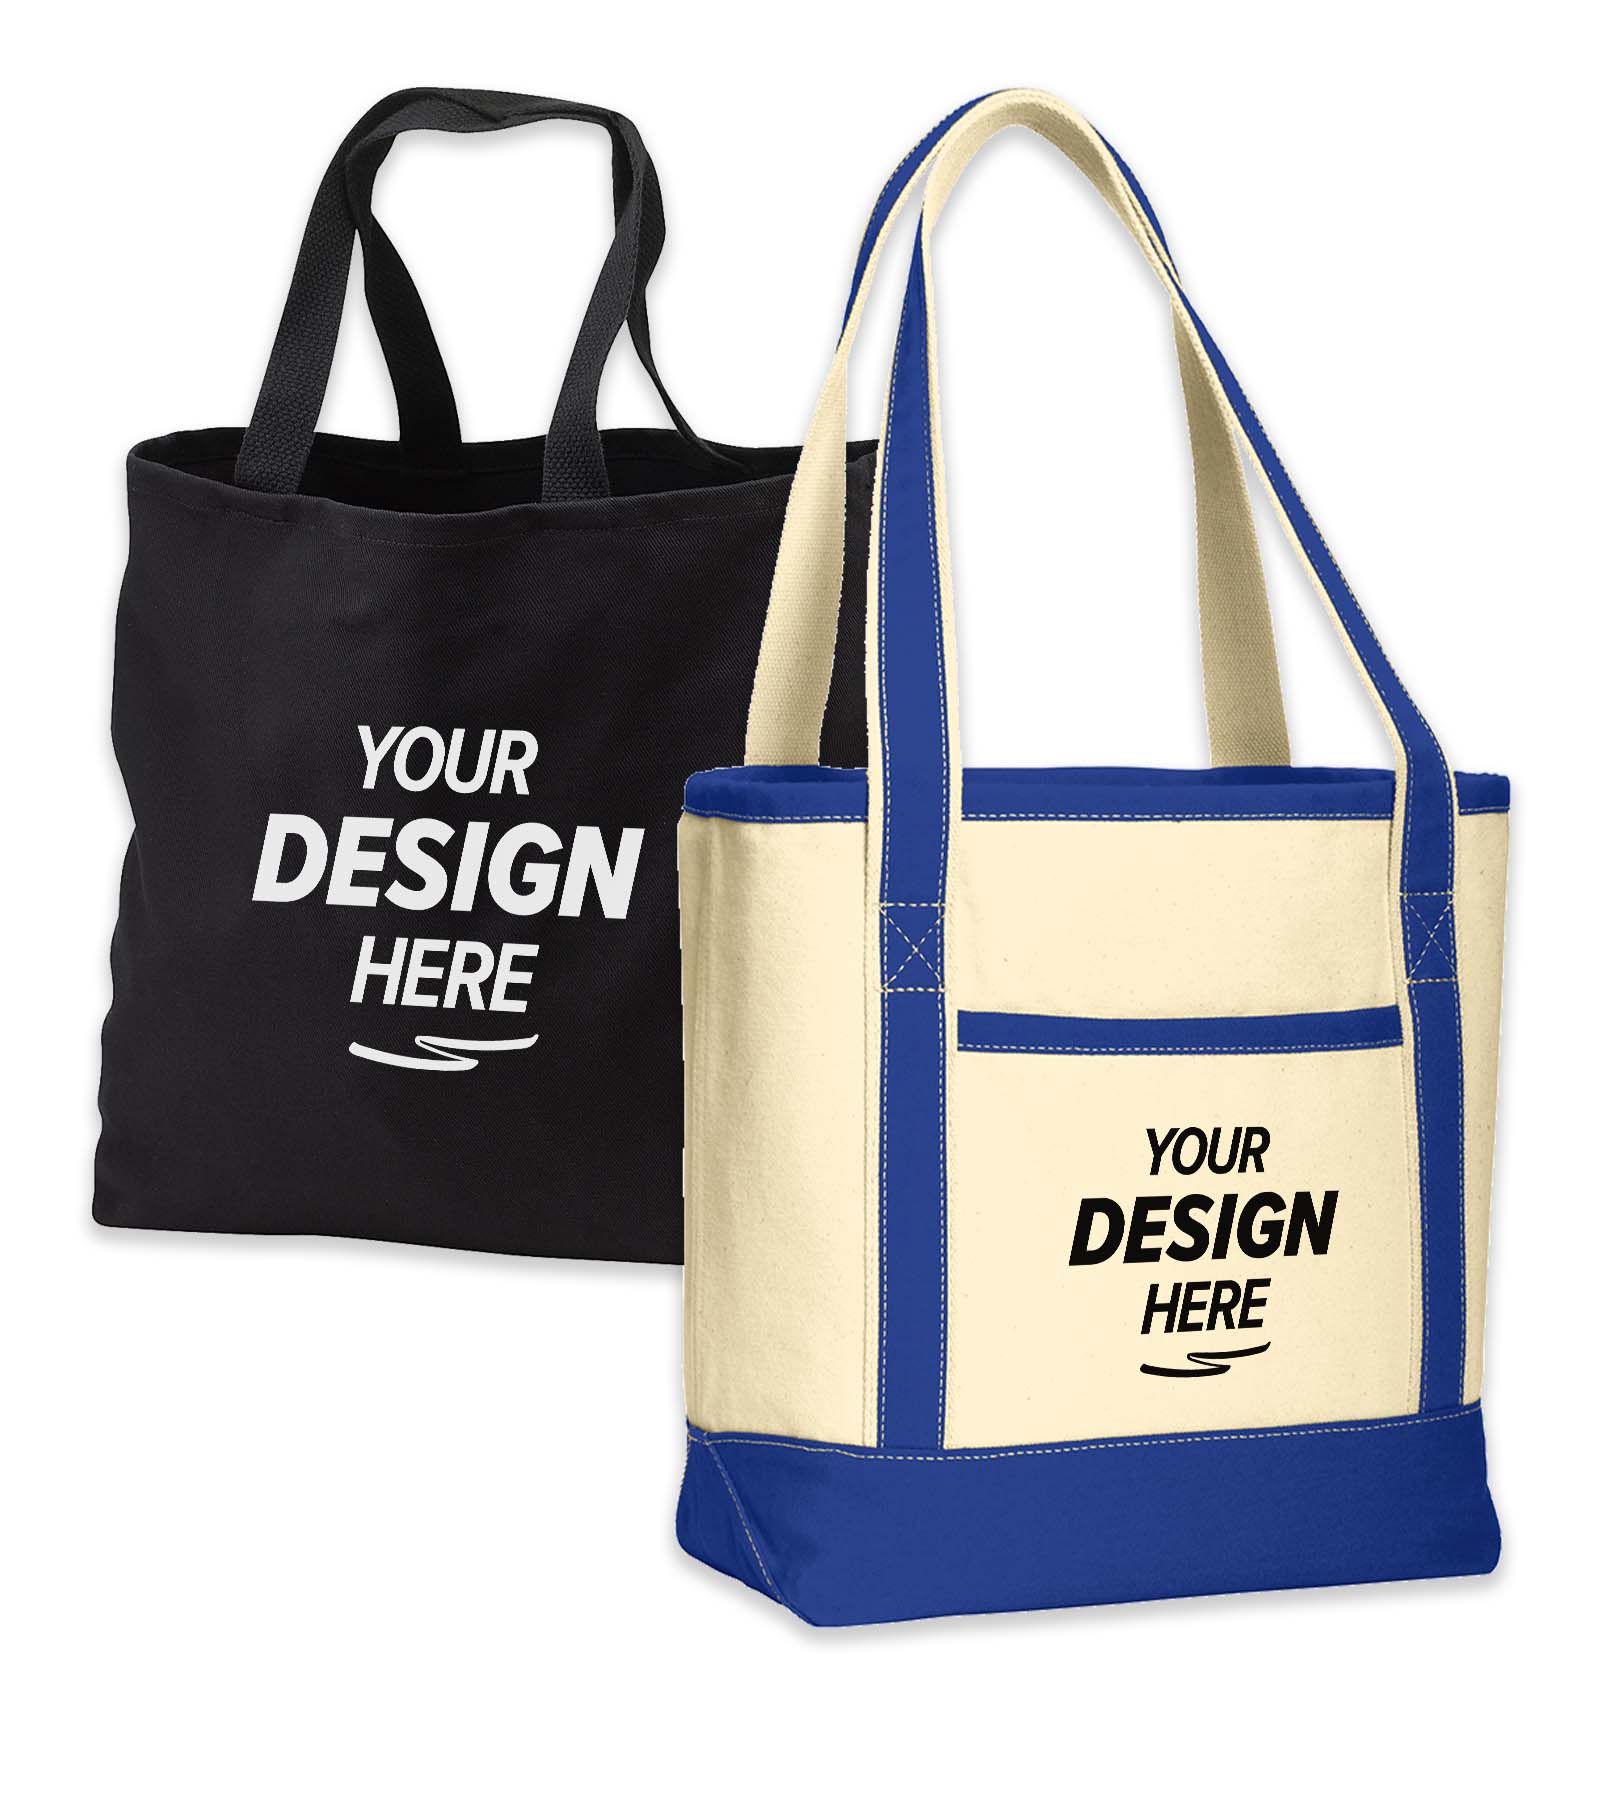 CUSTOM TOUCH Loop Handle Canvas tote bag white designer SizeDimension  14x16 Inch